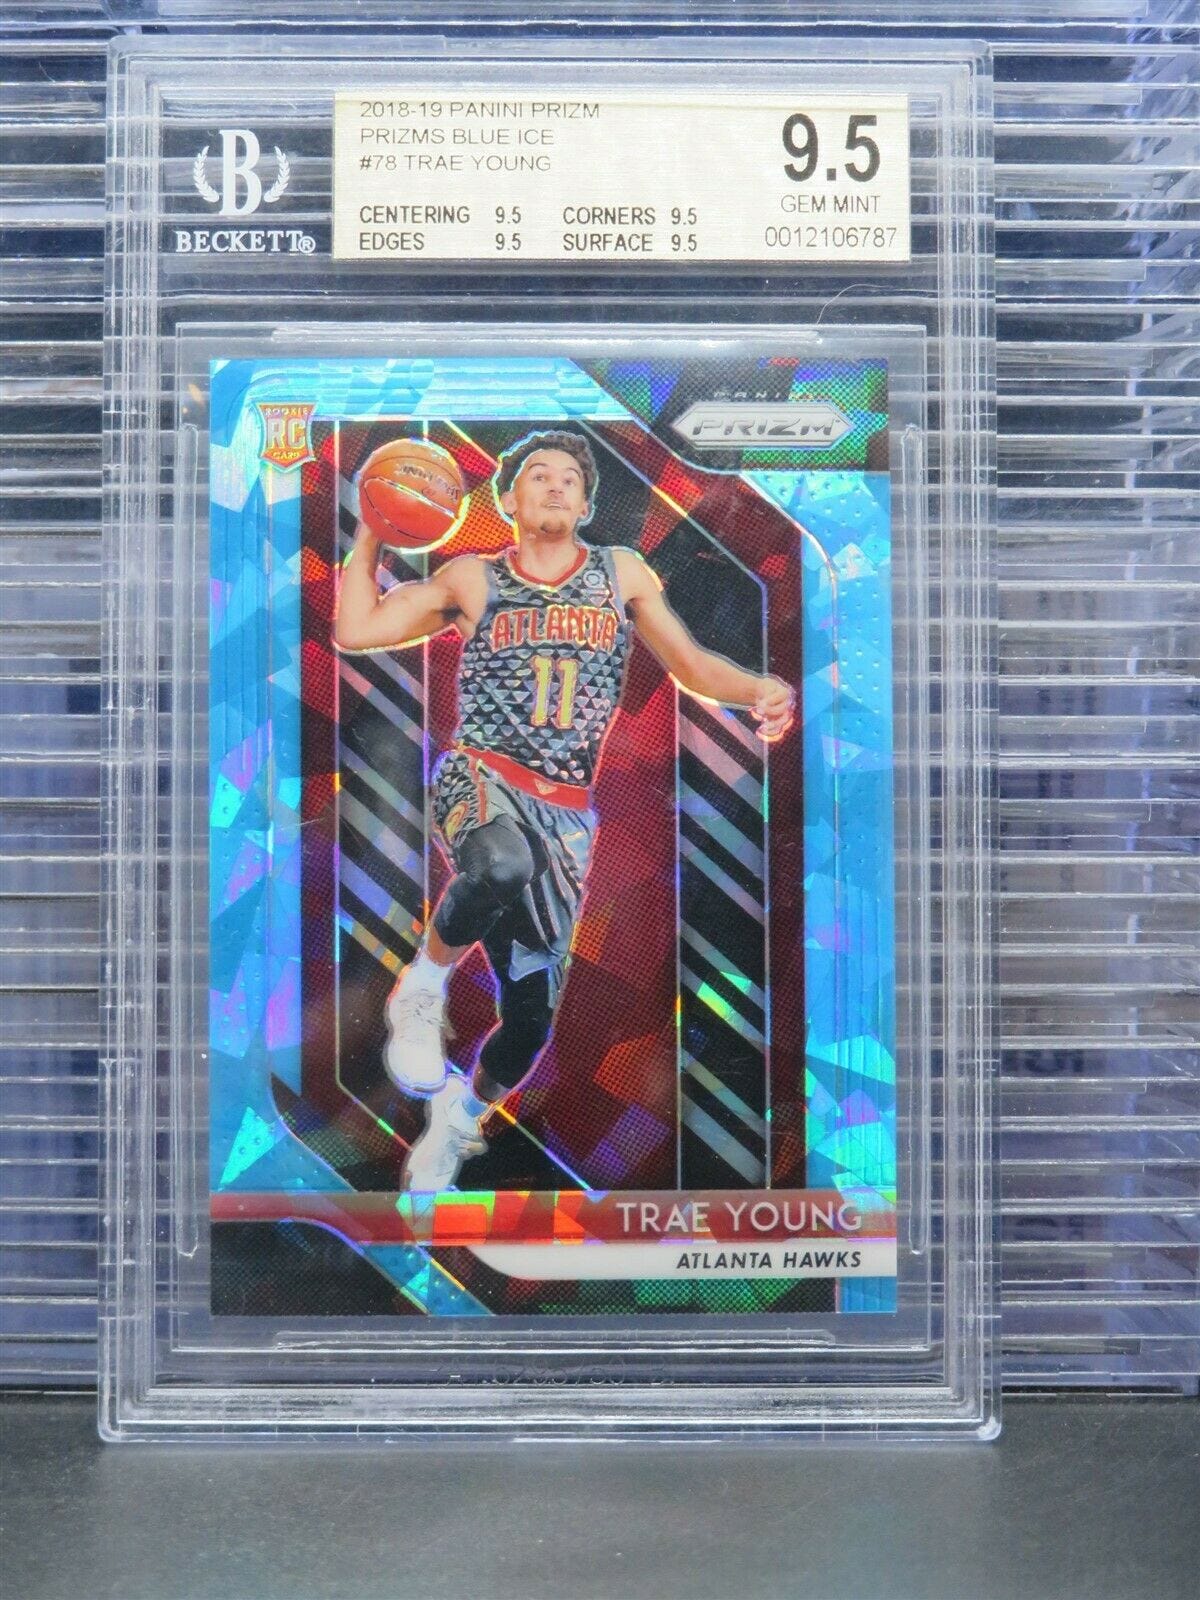 Image 1 - 2018-19-Prizm-Trae-Young-Blue-Ice-Prizm-Rookie-Card-RC-36-99-BGS-9-5-Q9